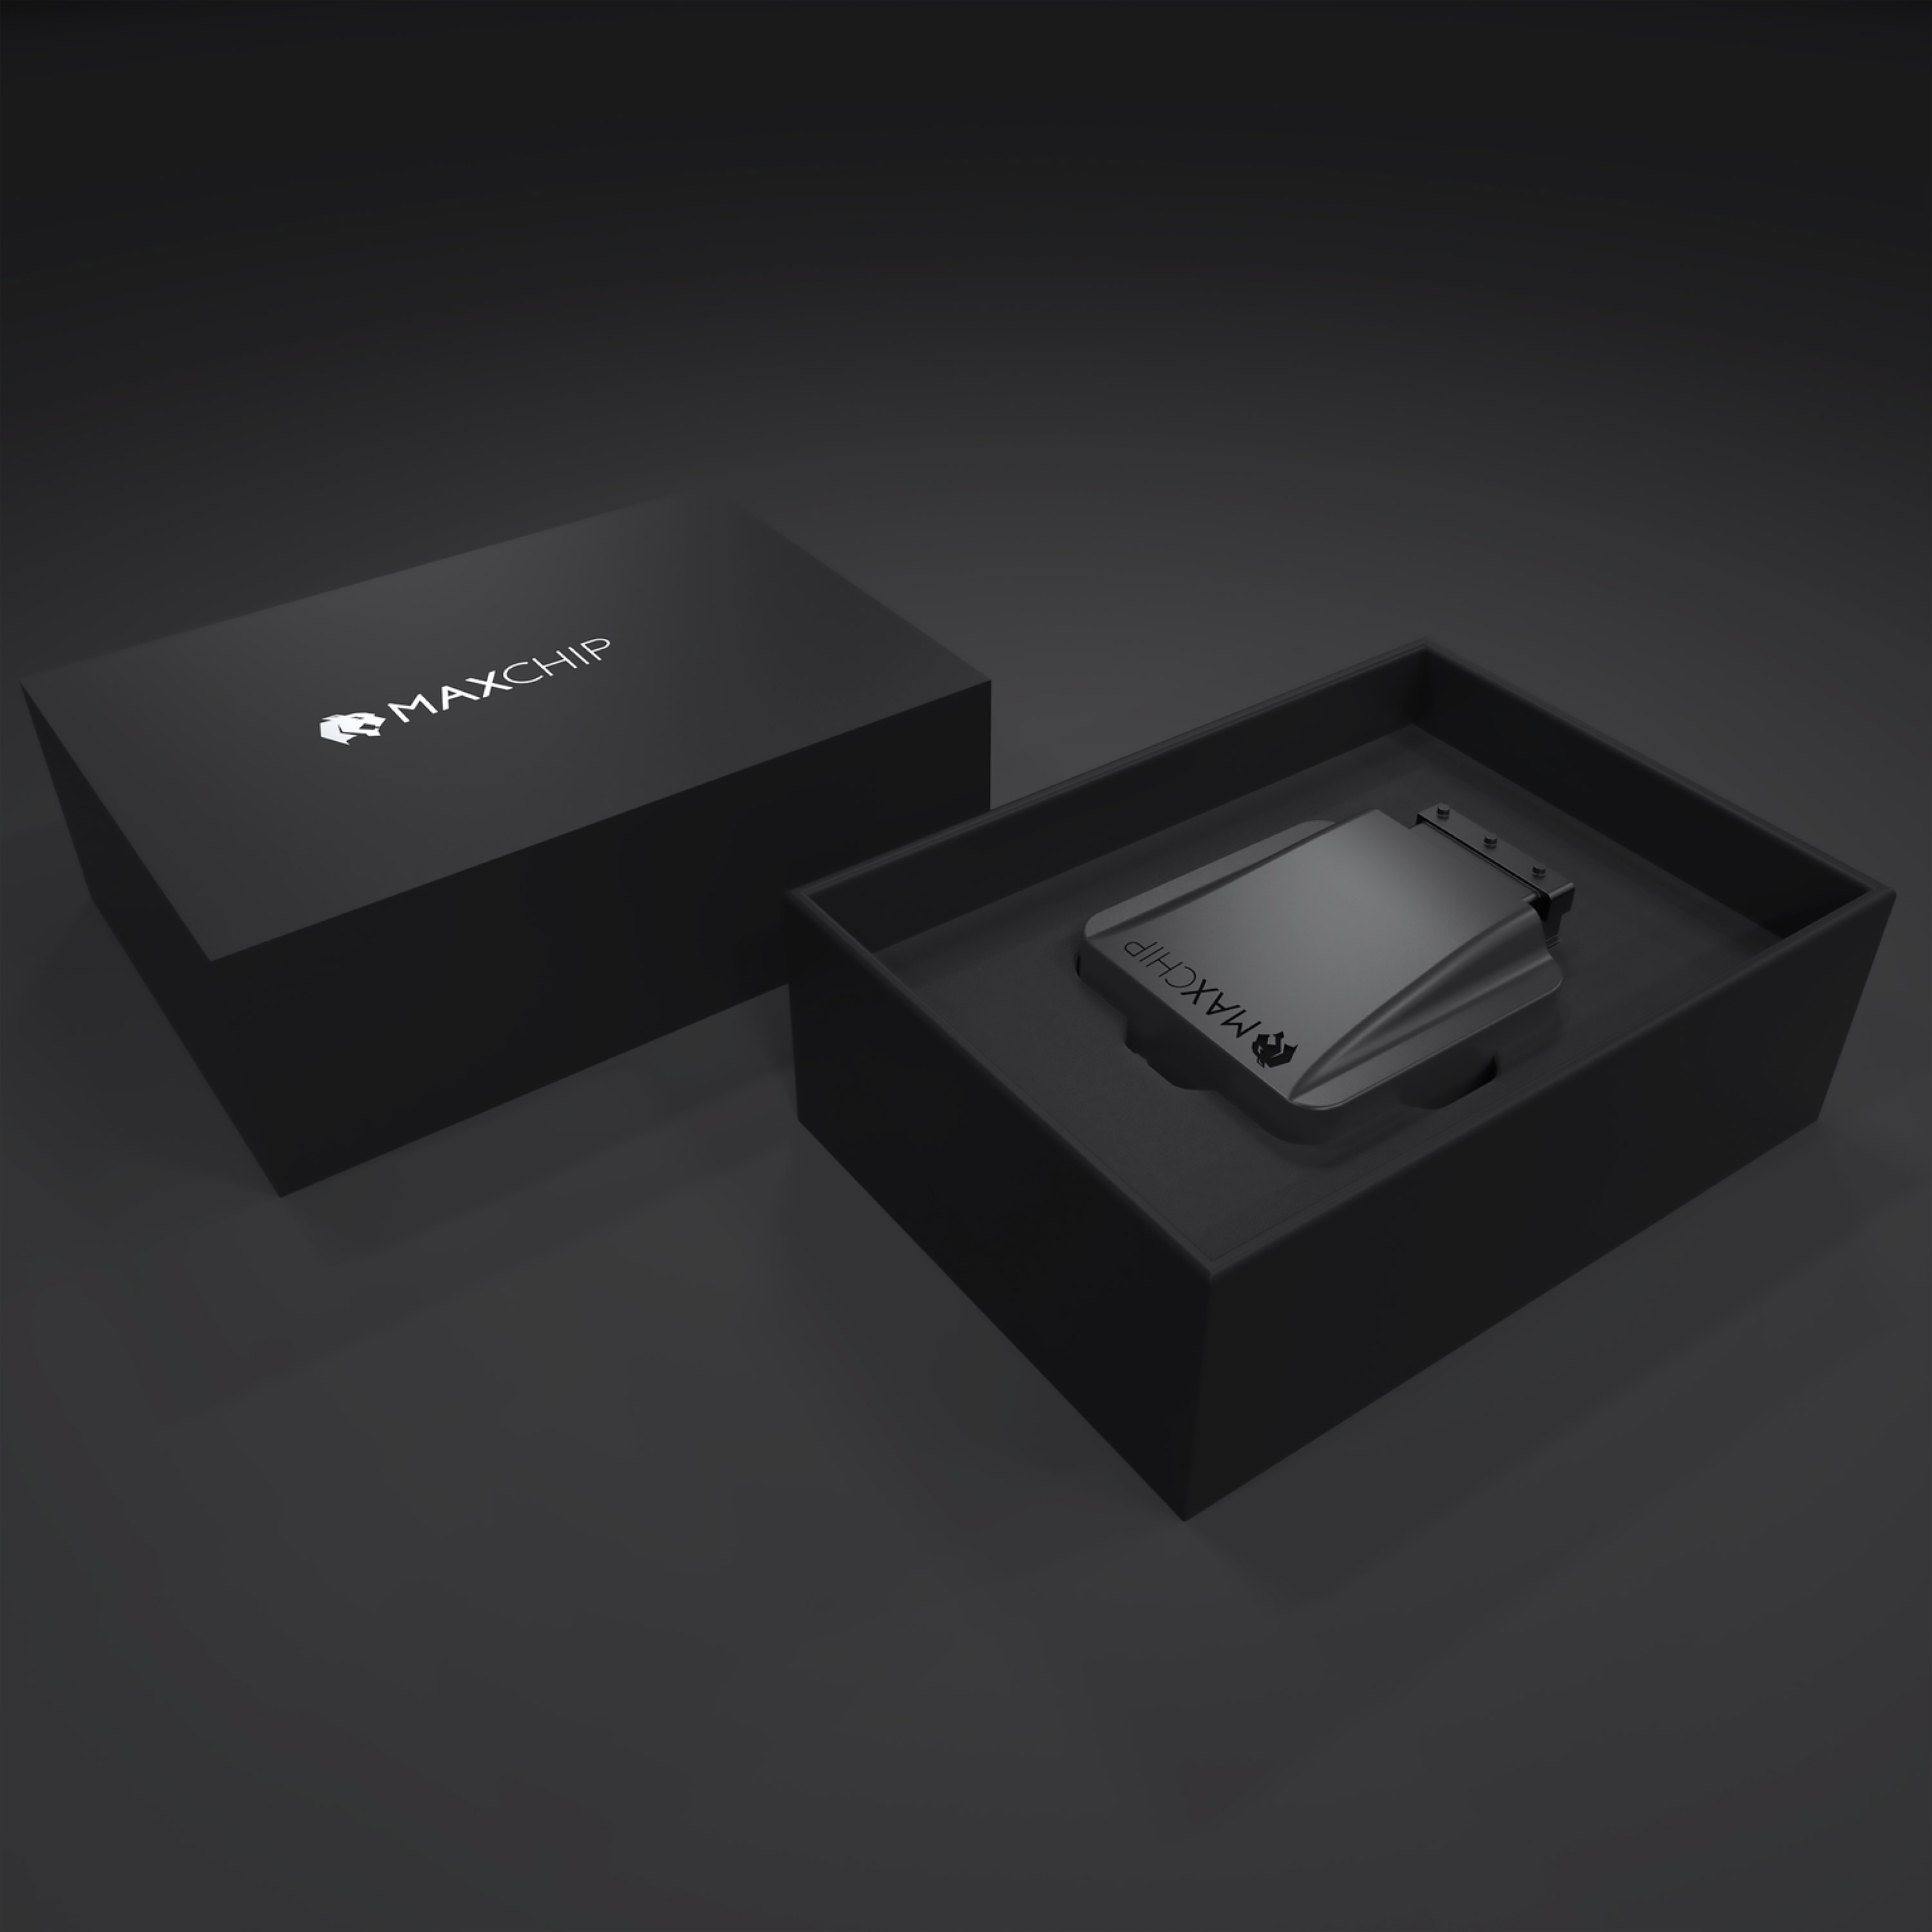 MaxChip tuning add-on boxes for enhanced performance